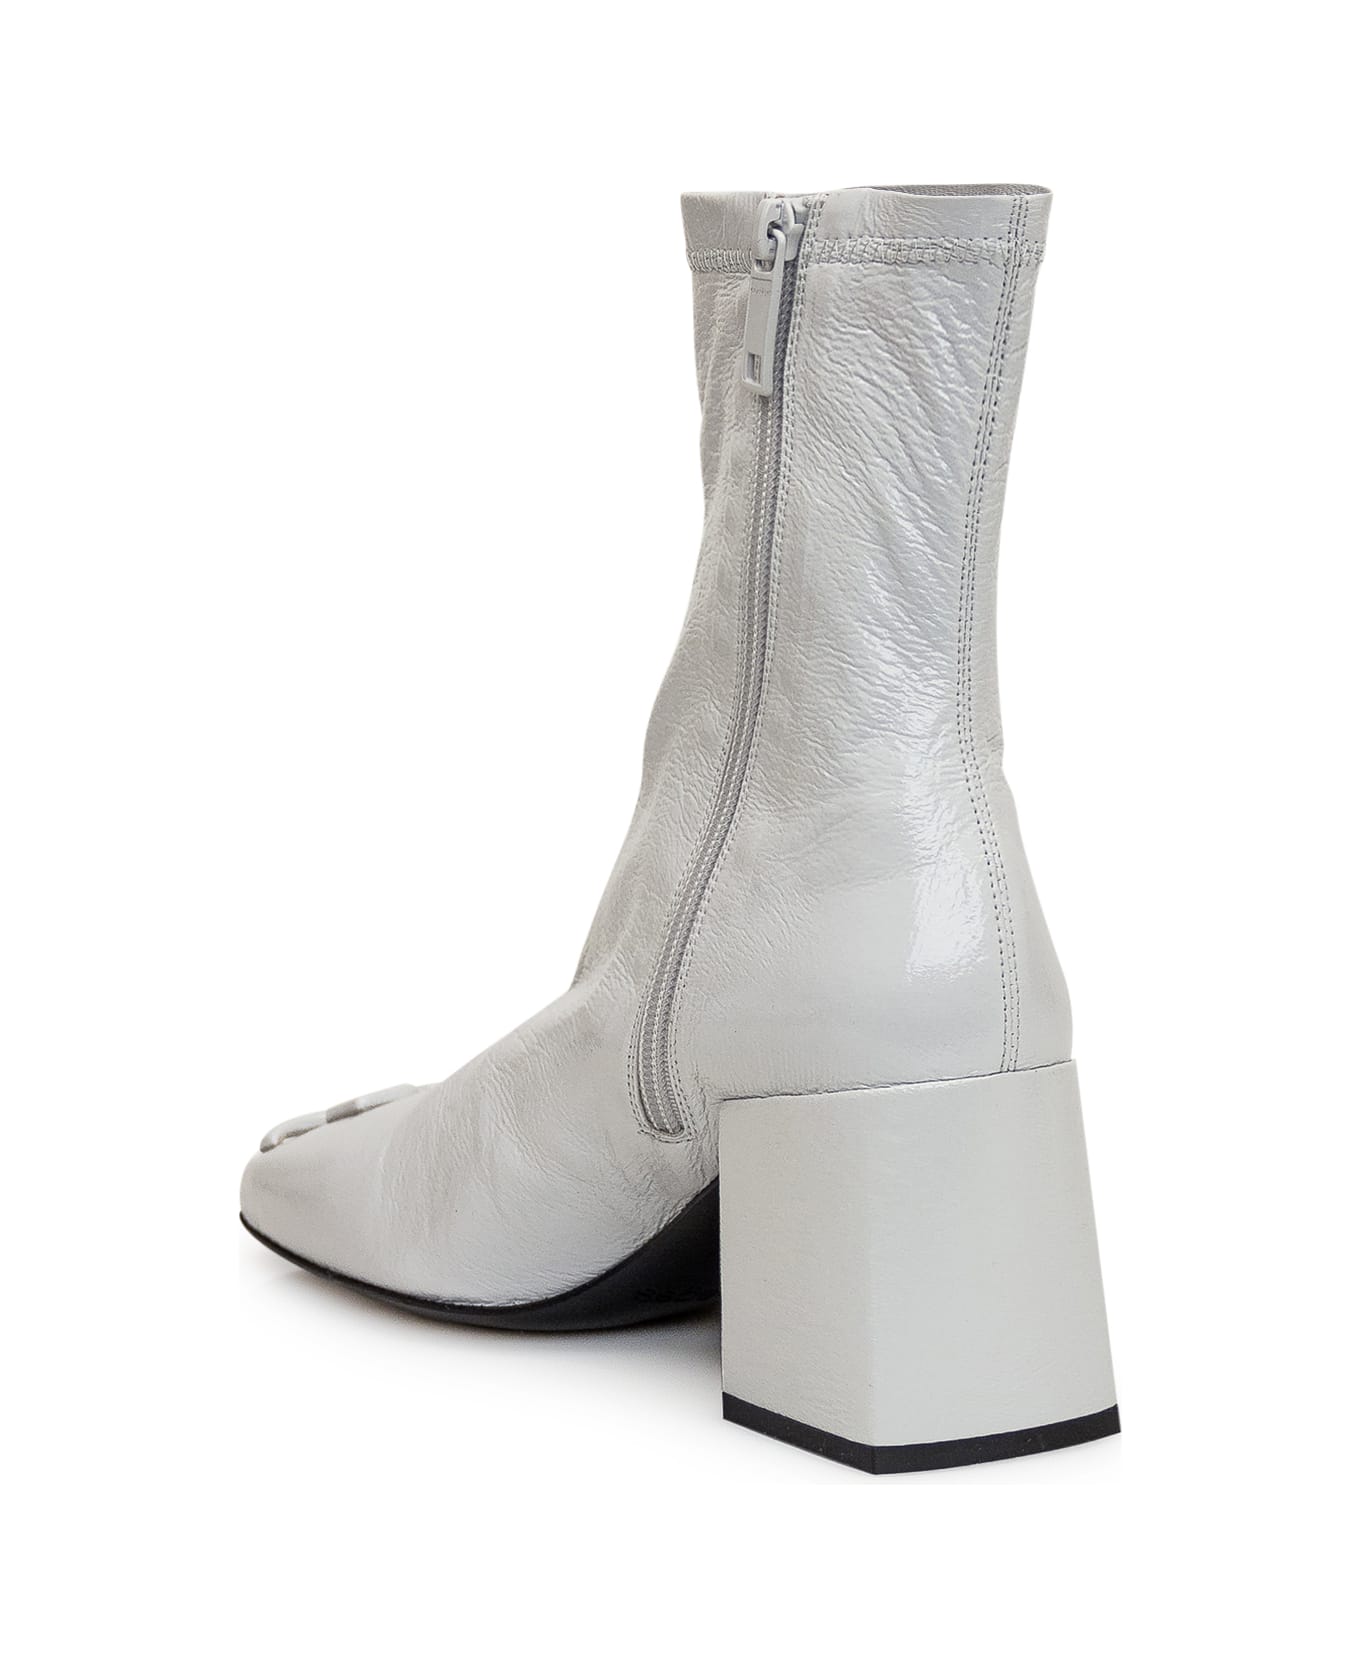 Courrèges Leather Boots - Dirty White